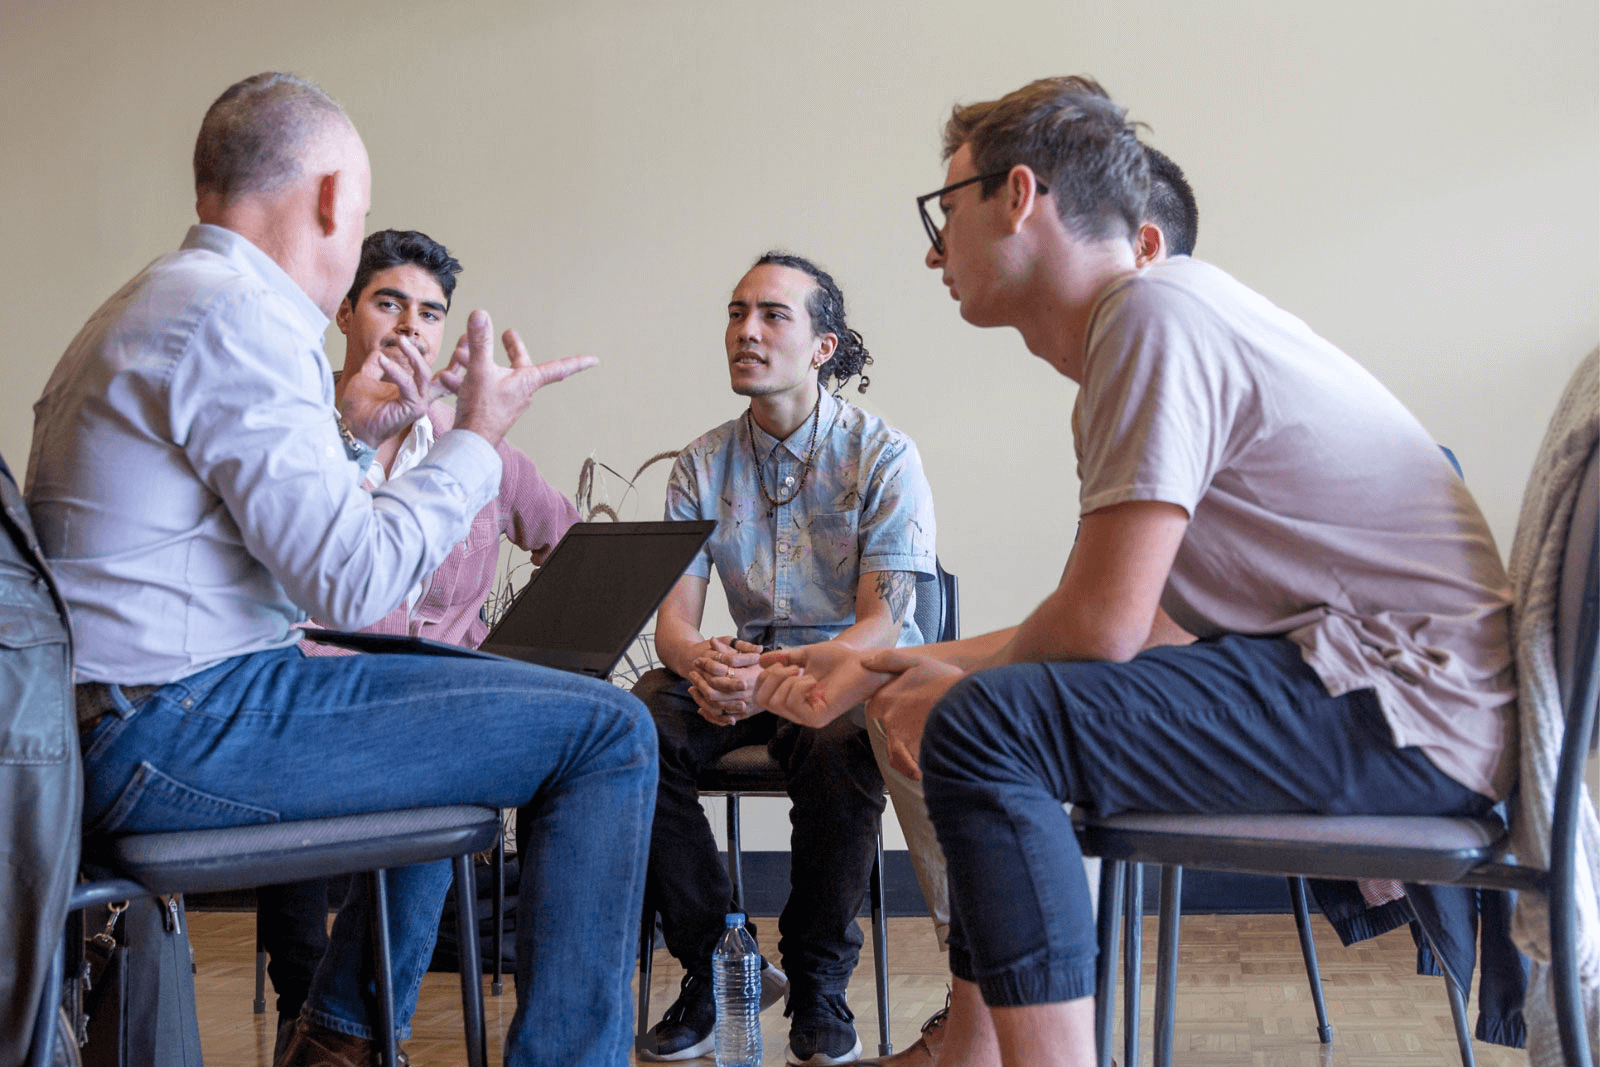 A group of individuals engaged in a focused discussion around a table, with an addiction specialist suggesting active participation and exchanging ideas.